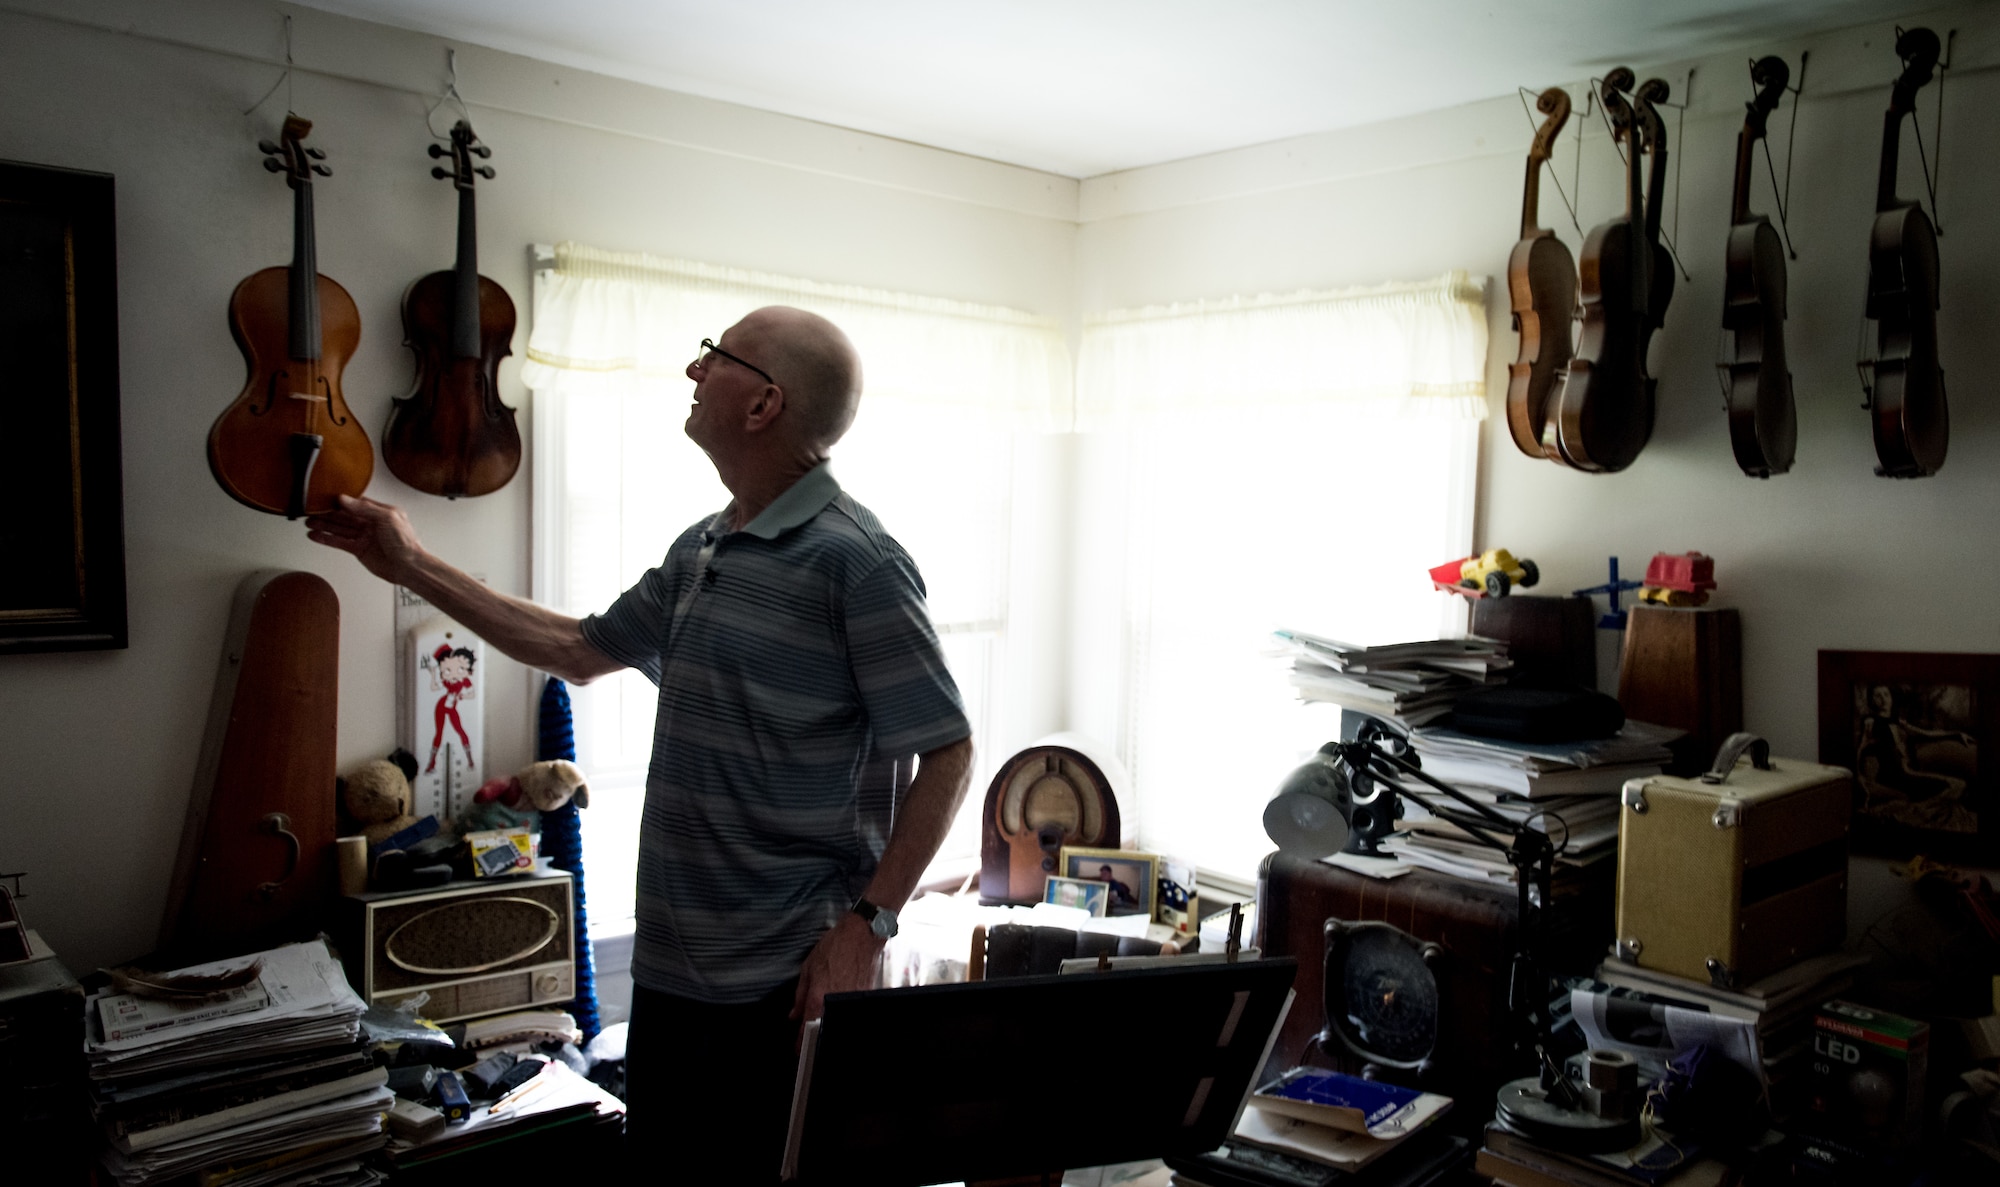 Retired U.S. Air Force Master Sgt. Daniel Holmes, picks up one of his handmade violins at his home in Lowell, Mass., Jun. 1, 2018. Holmes teaches Airmen various electronic and mechanical skills not taught during their technical training in order for them to maintain 1960's era technology used  at the Sagamore Hill Solar Observatory of the 2nd Weather Squadron, Det. 2, in Hamilton, Mass. (U.S. Air Force photo by J.M. Eddins Jr.)